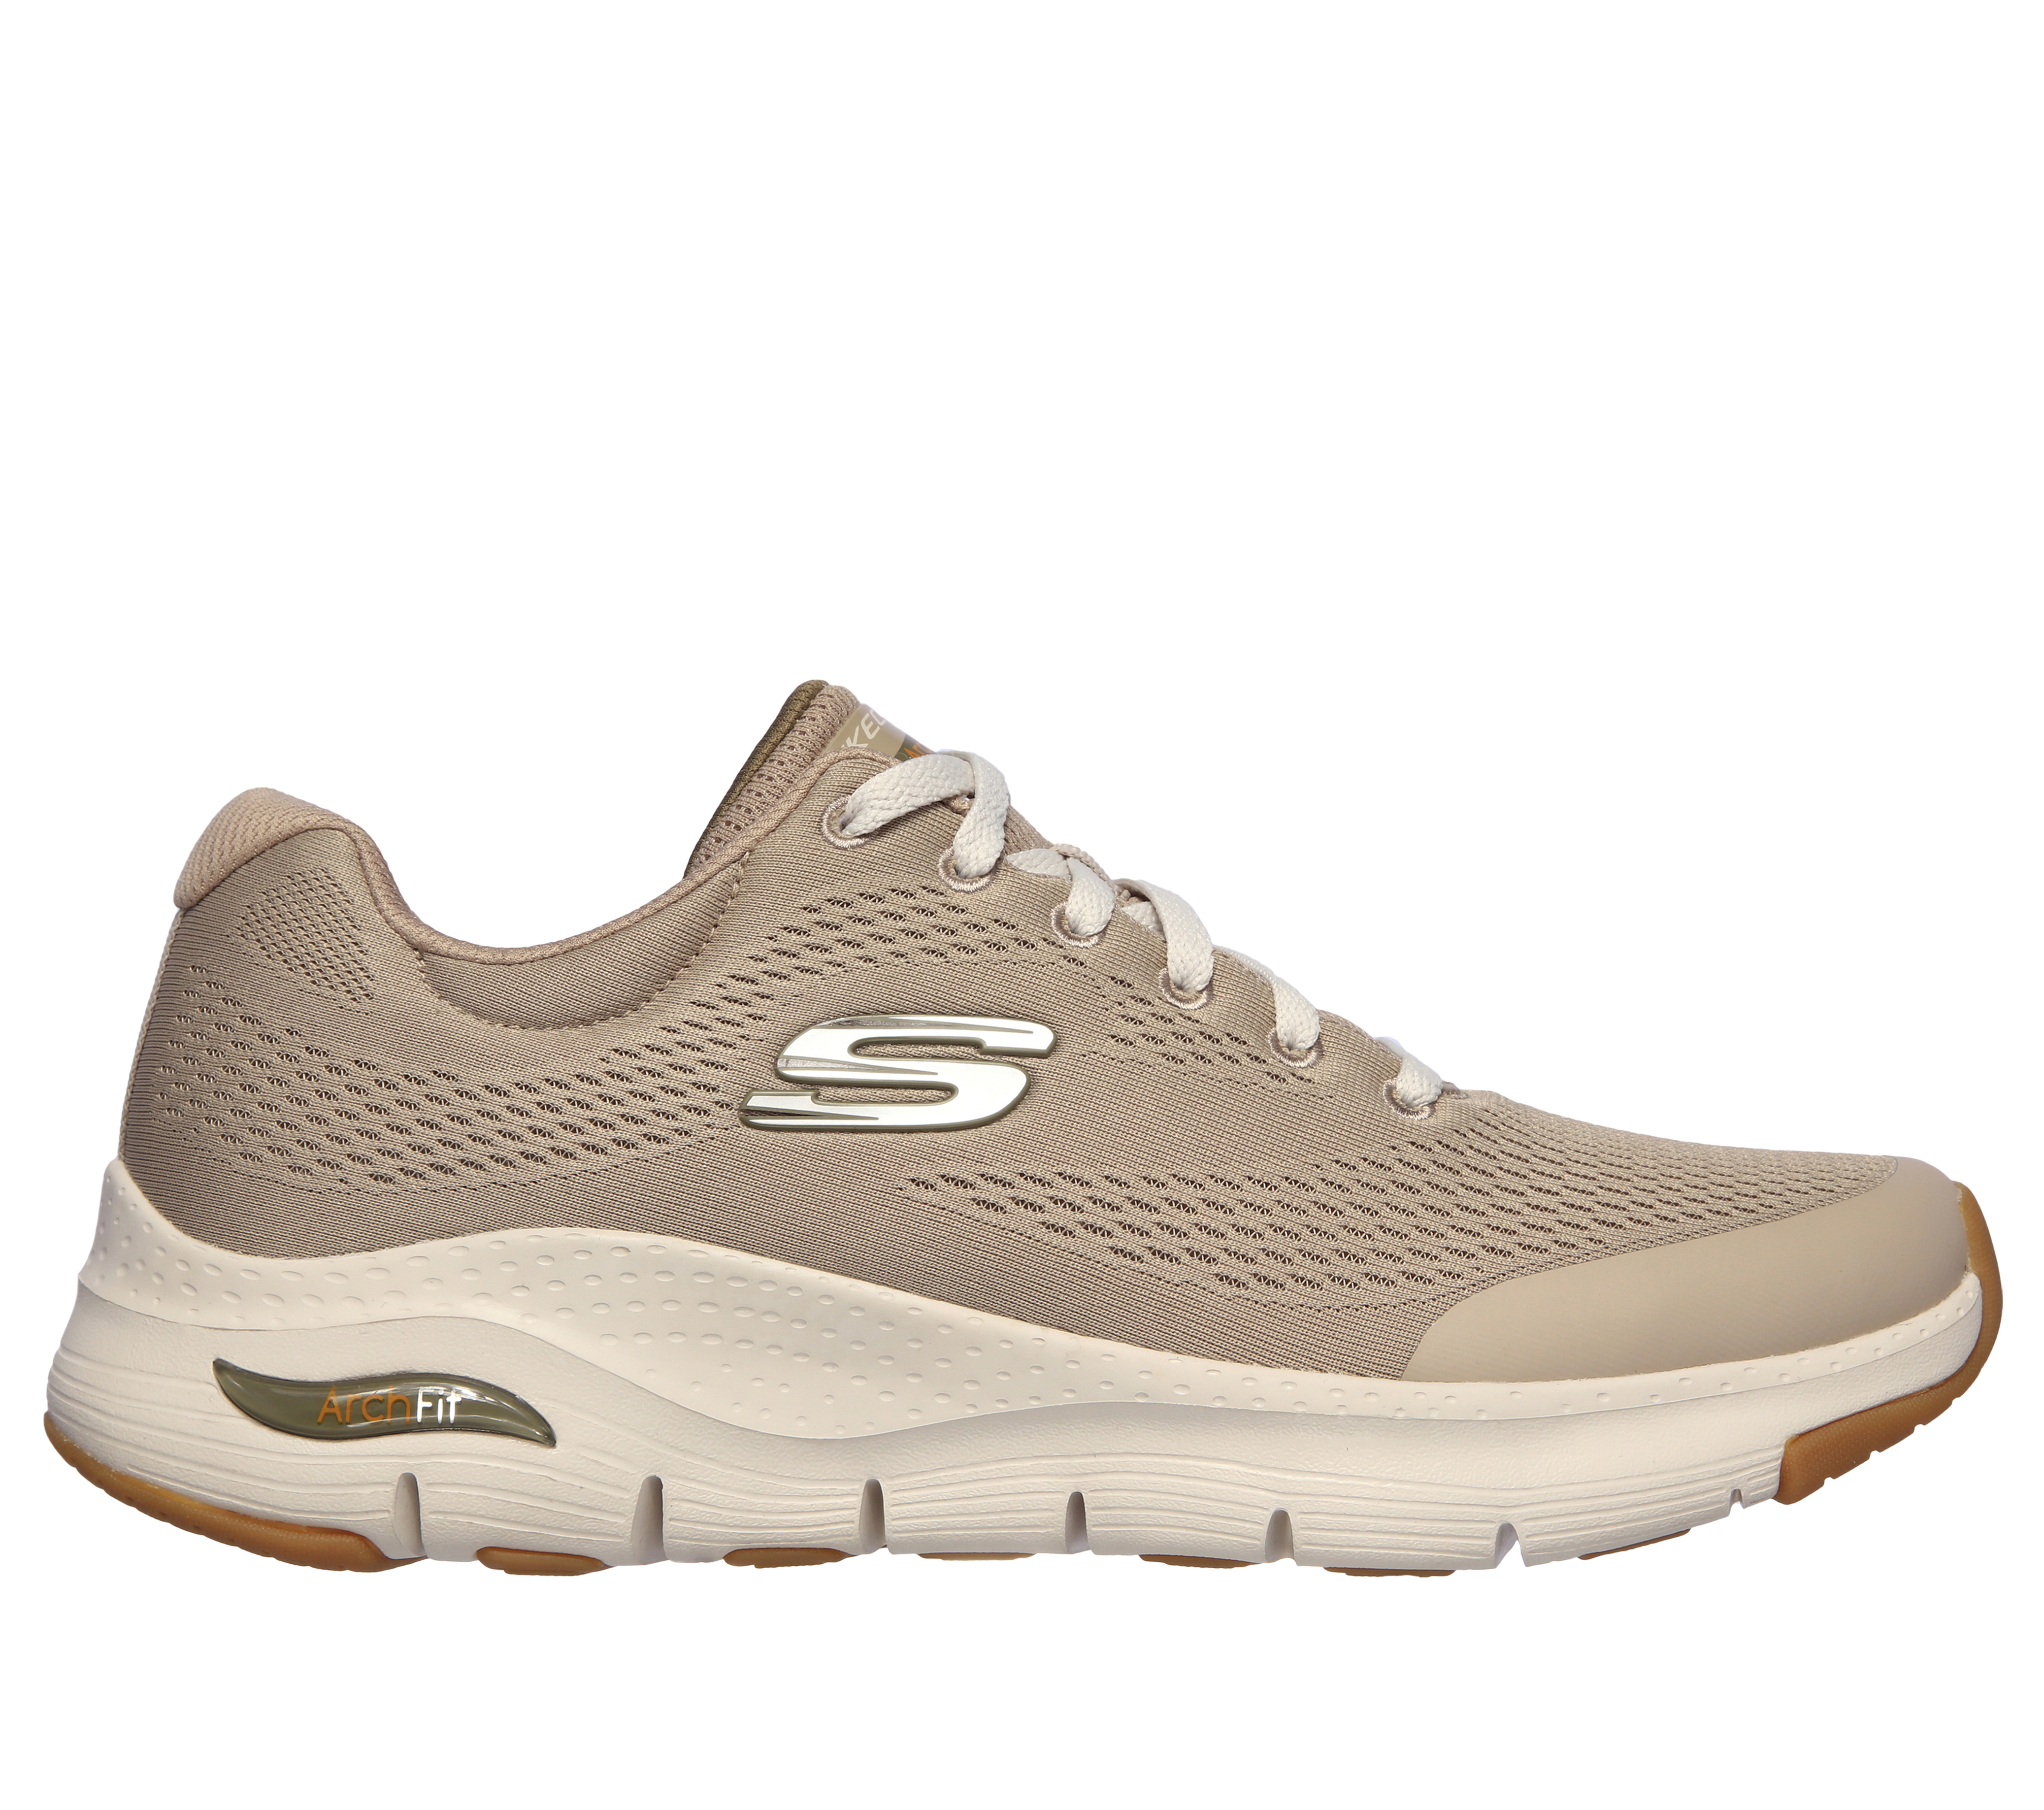 who sells skechers shoes